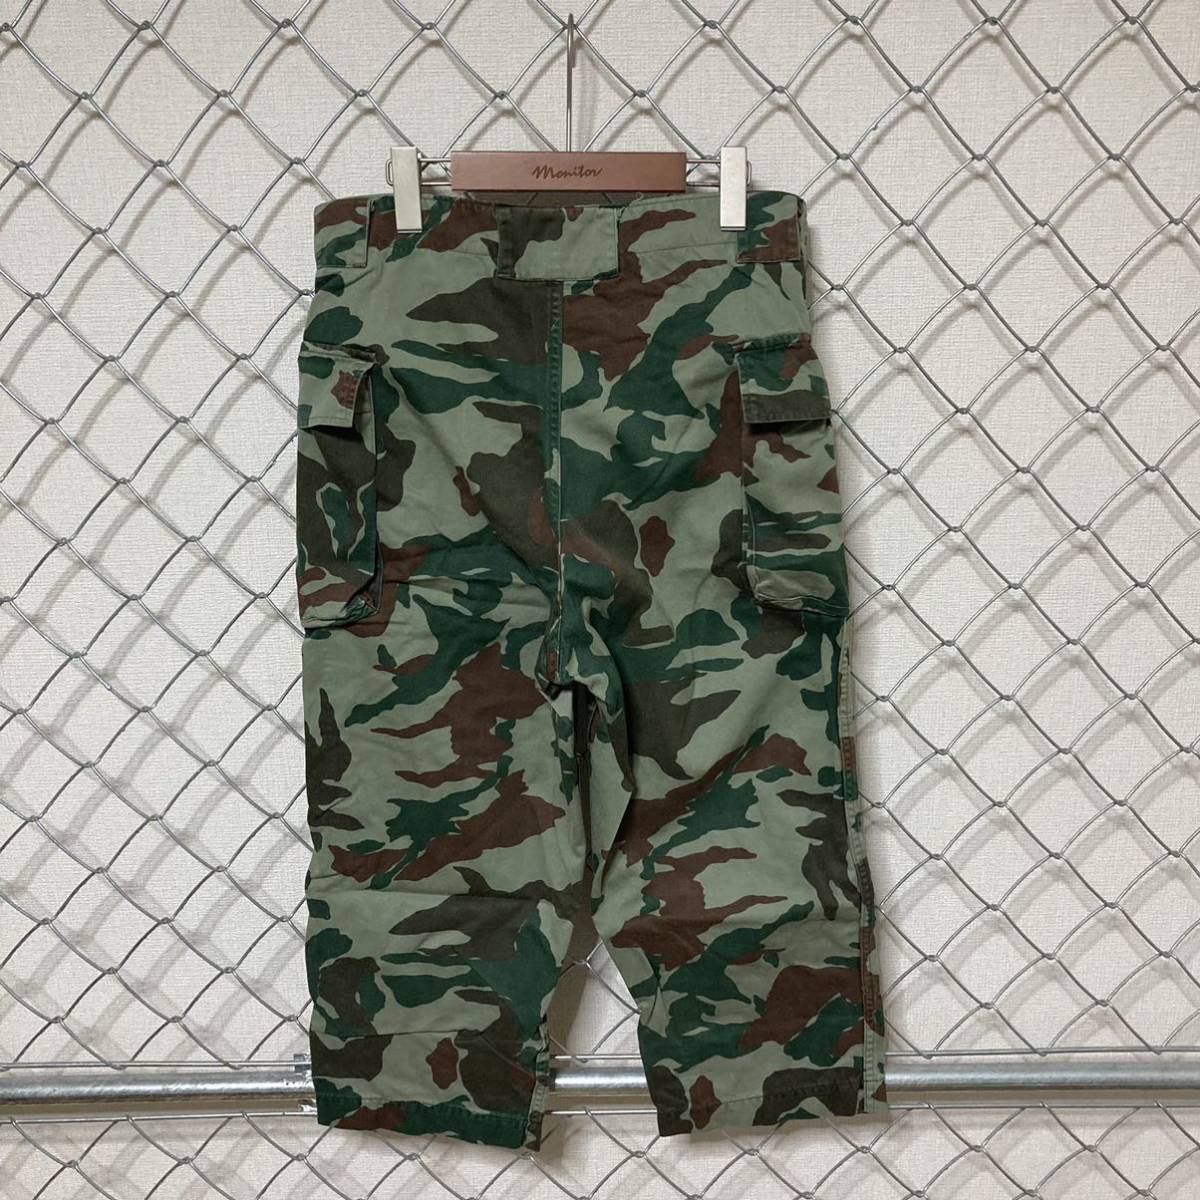  Defense Agency also settled collection . Ground Self-Defense Force old camouflage bear . pattern work clothes trousers pants 